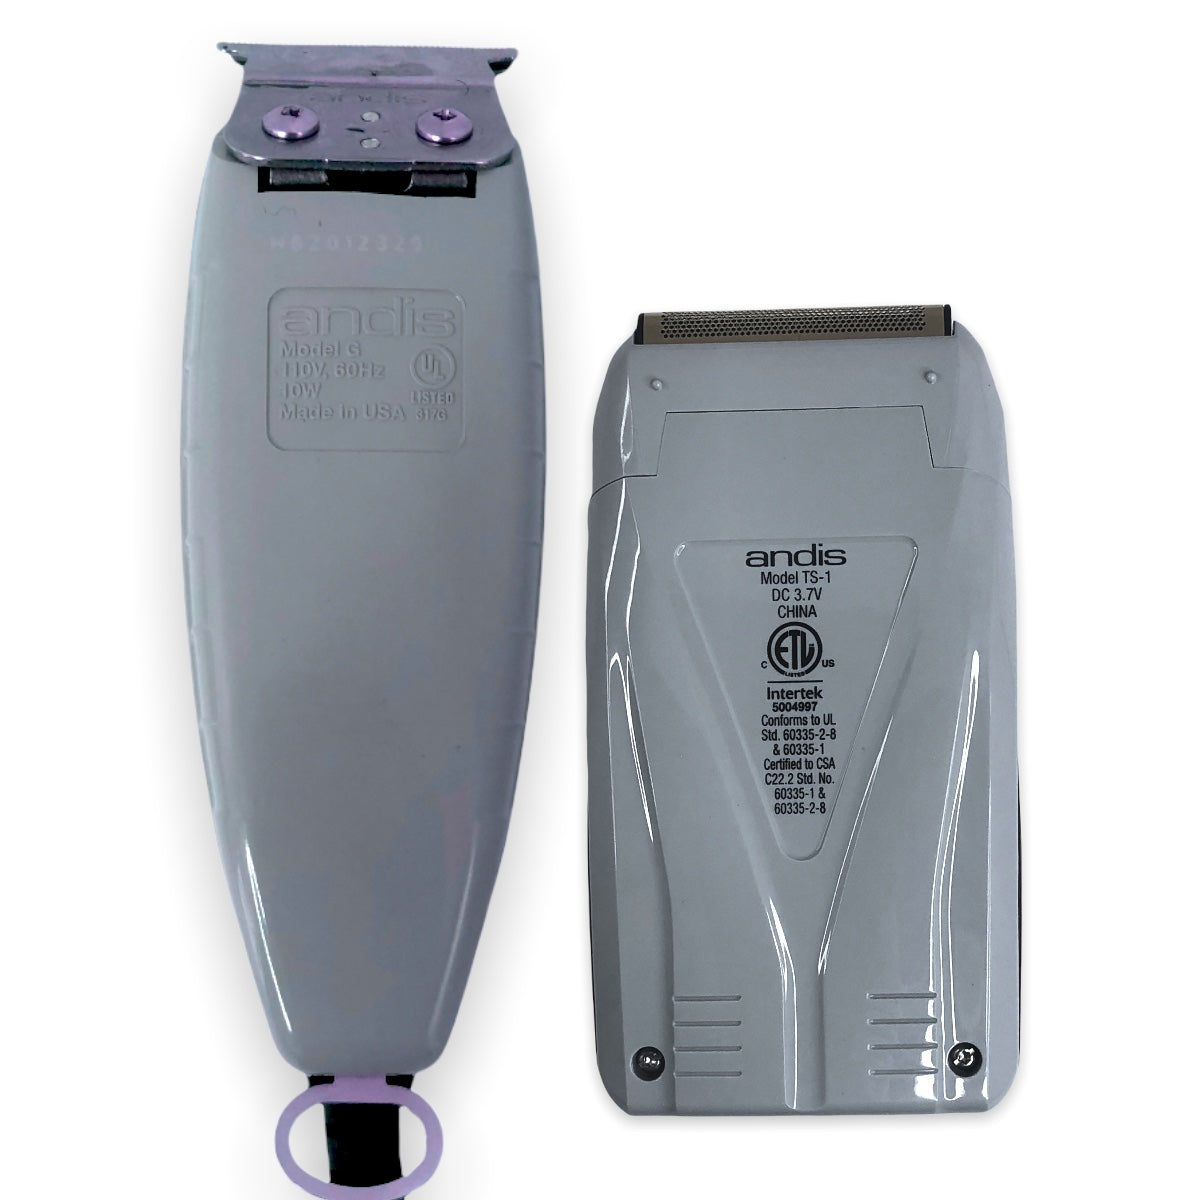 Combo Profesional Andis Finishing Shaver y Trimmer